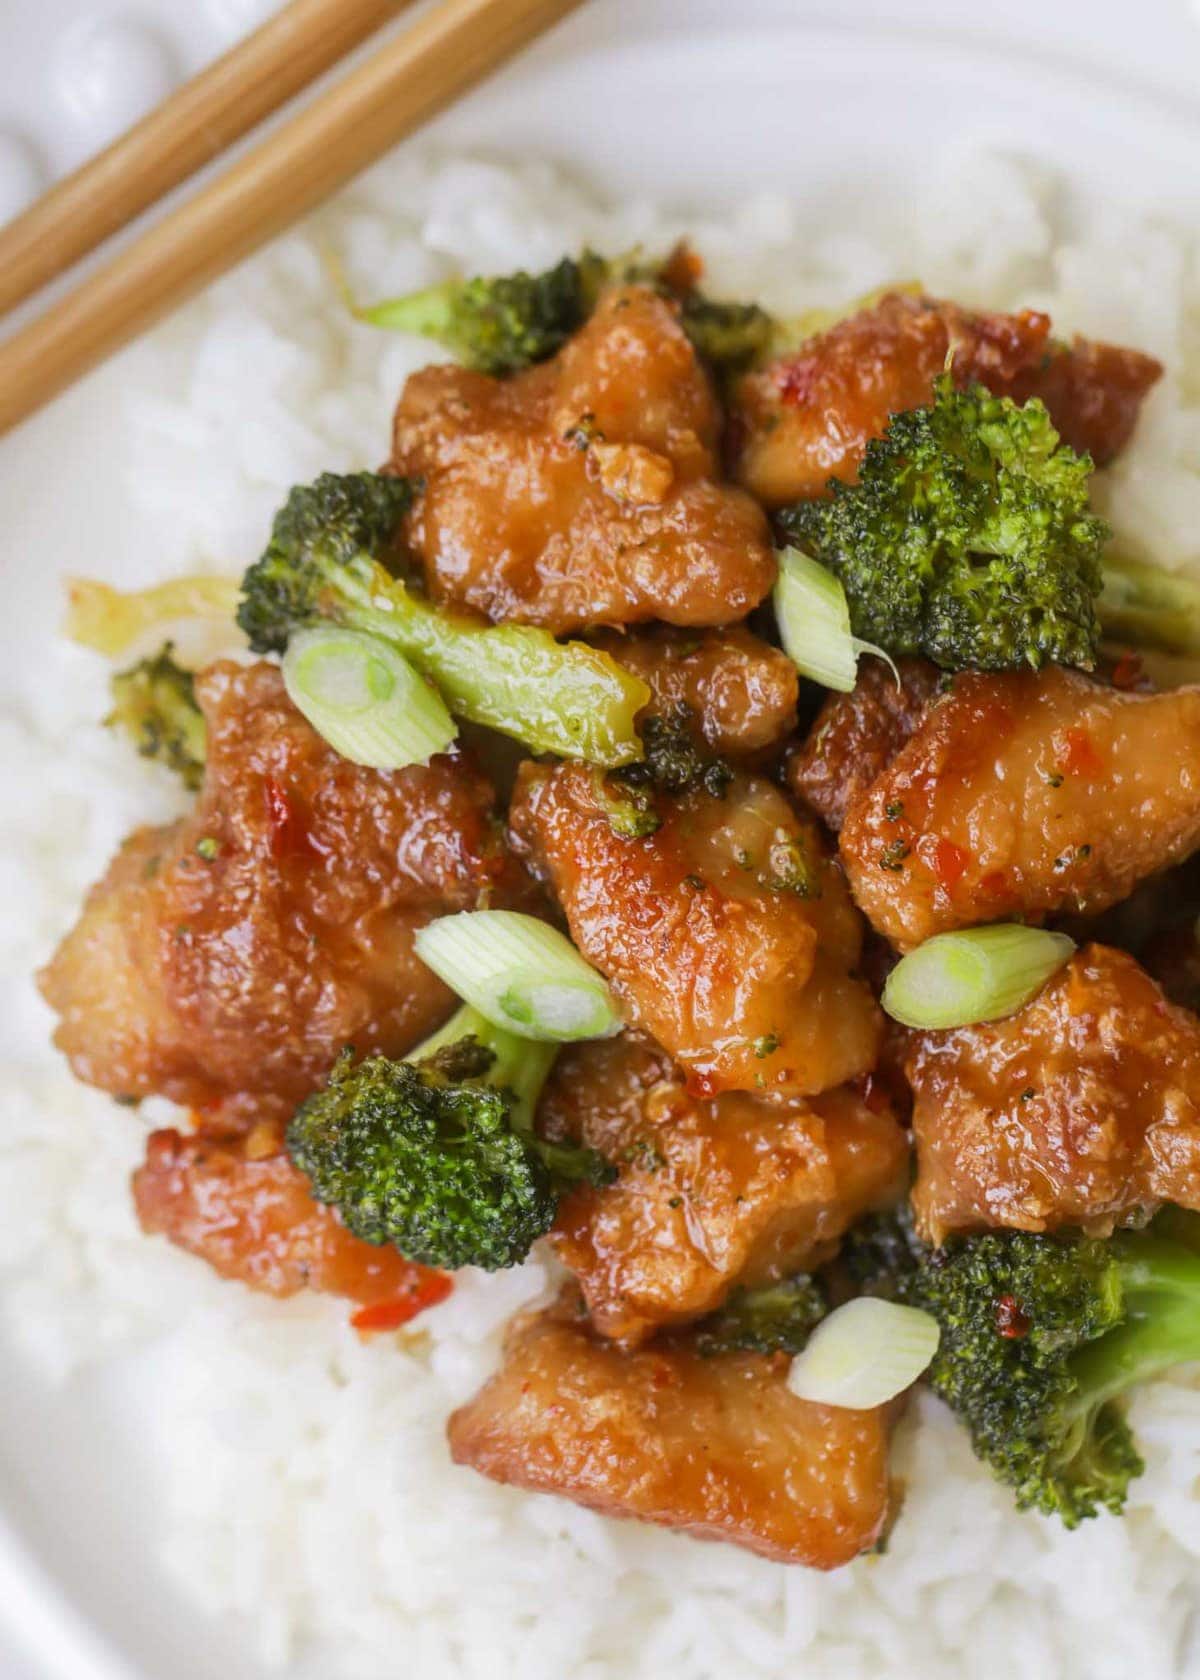 General Tso's chicken served on top of white rice with broccoli.